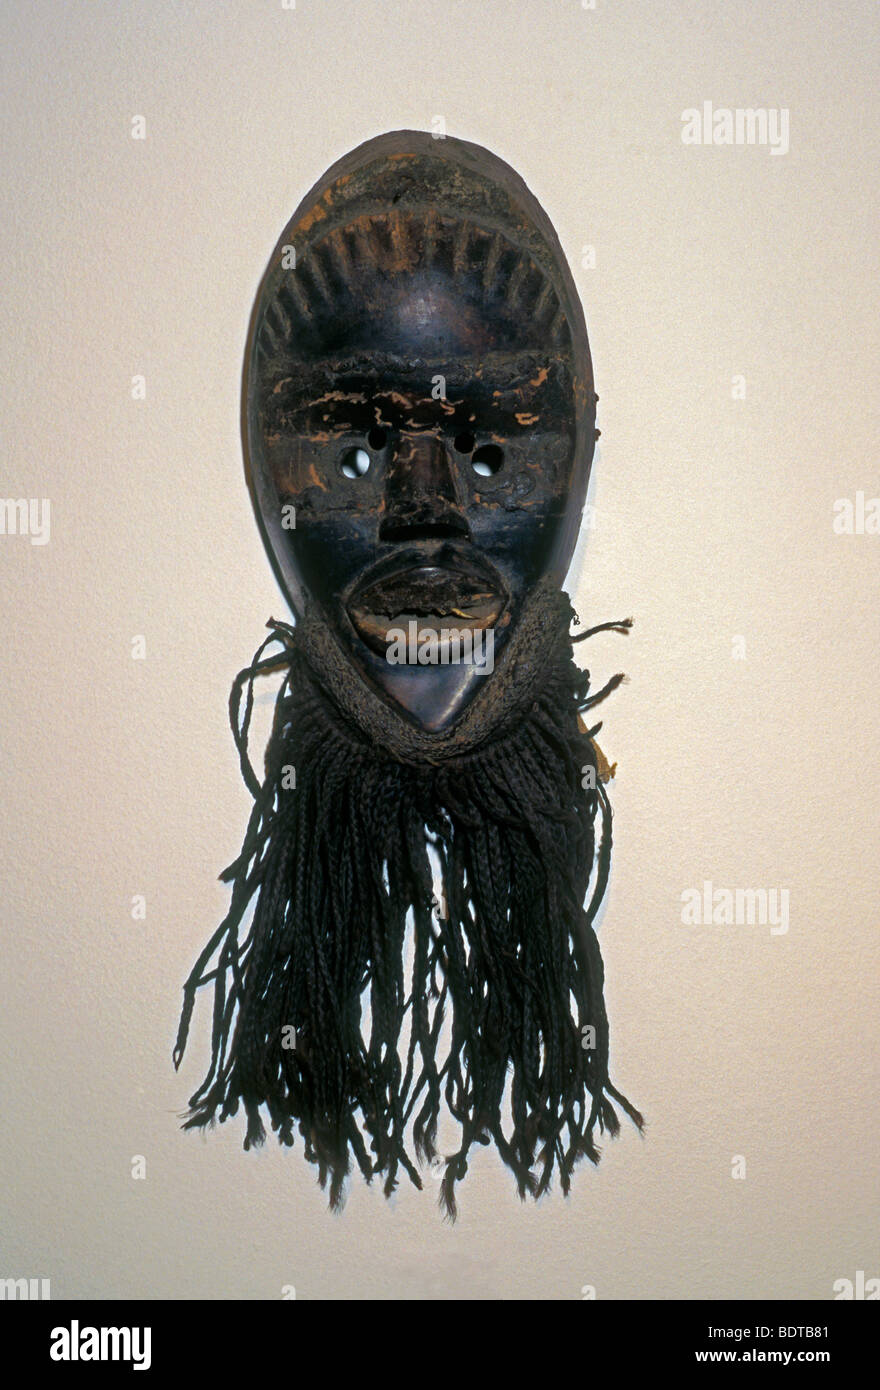 dance mask, mask, wooden mask, made of wood and hair, 24x15x8 cm, National Gallery, city of Harare, Harare, Harare Province, Zimbabwe, Africa Stock Photo